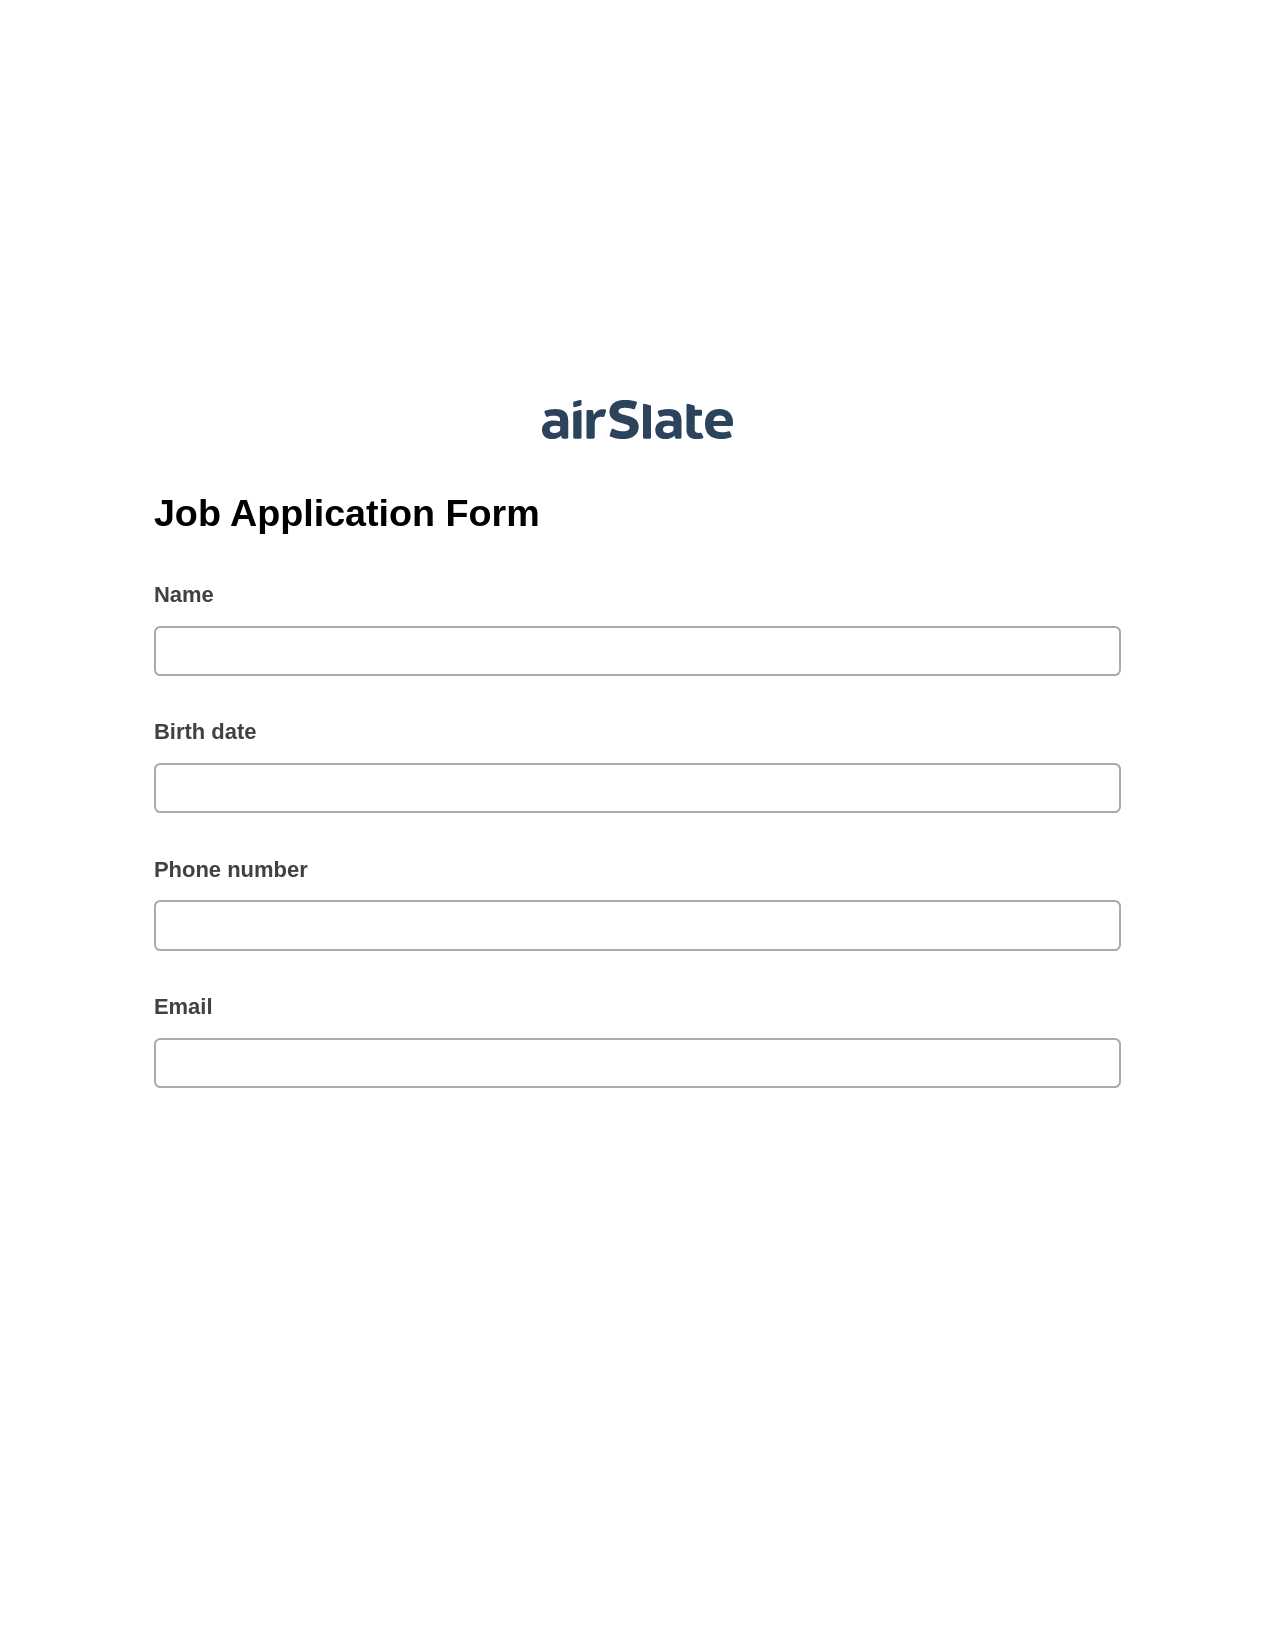 Multirole Job Application Form Pre-fill from Office 365 Excel Bot, Add Tags to Slate Bot, OneDrive Bot